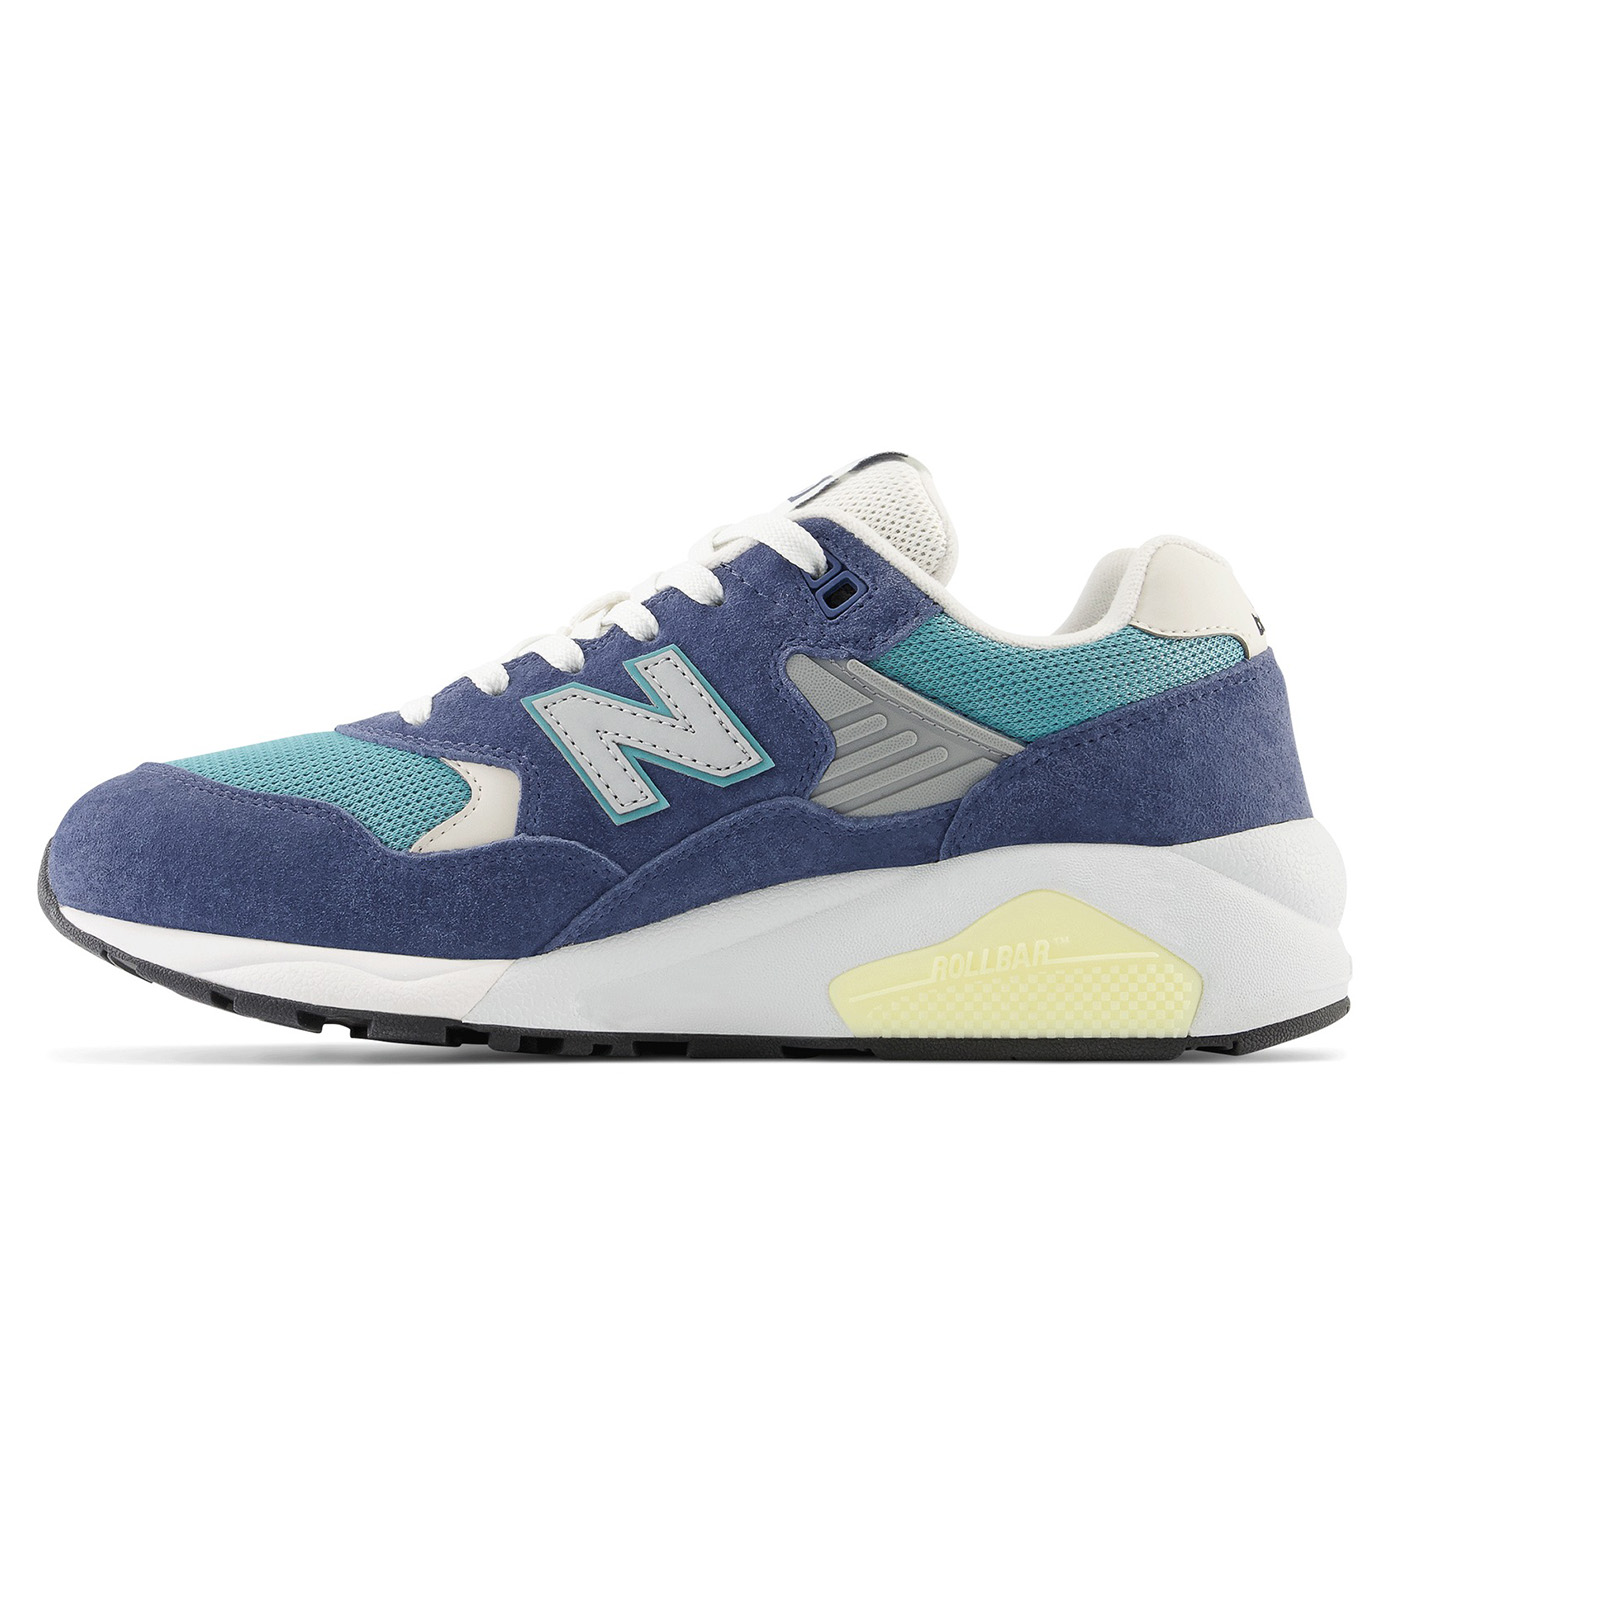 New Balance MT580CA2 | Men \ #Recommended Brands \ New Balance Brands ...